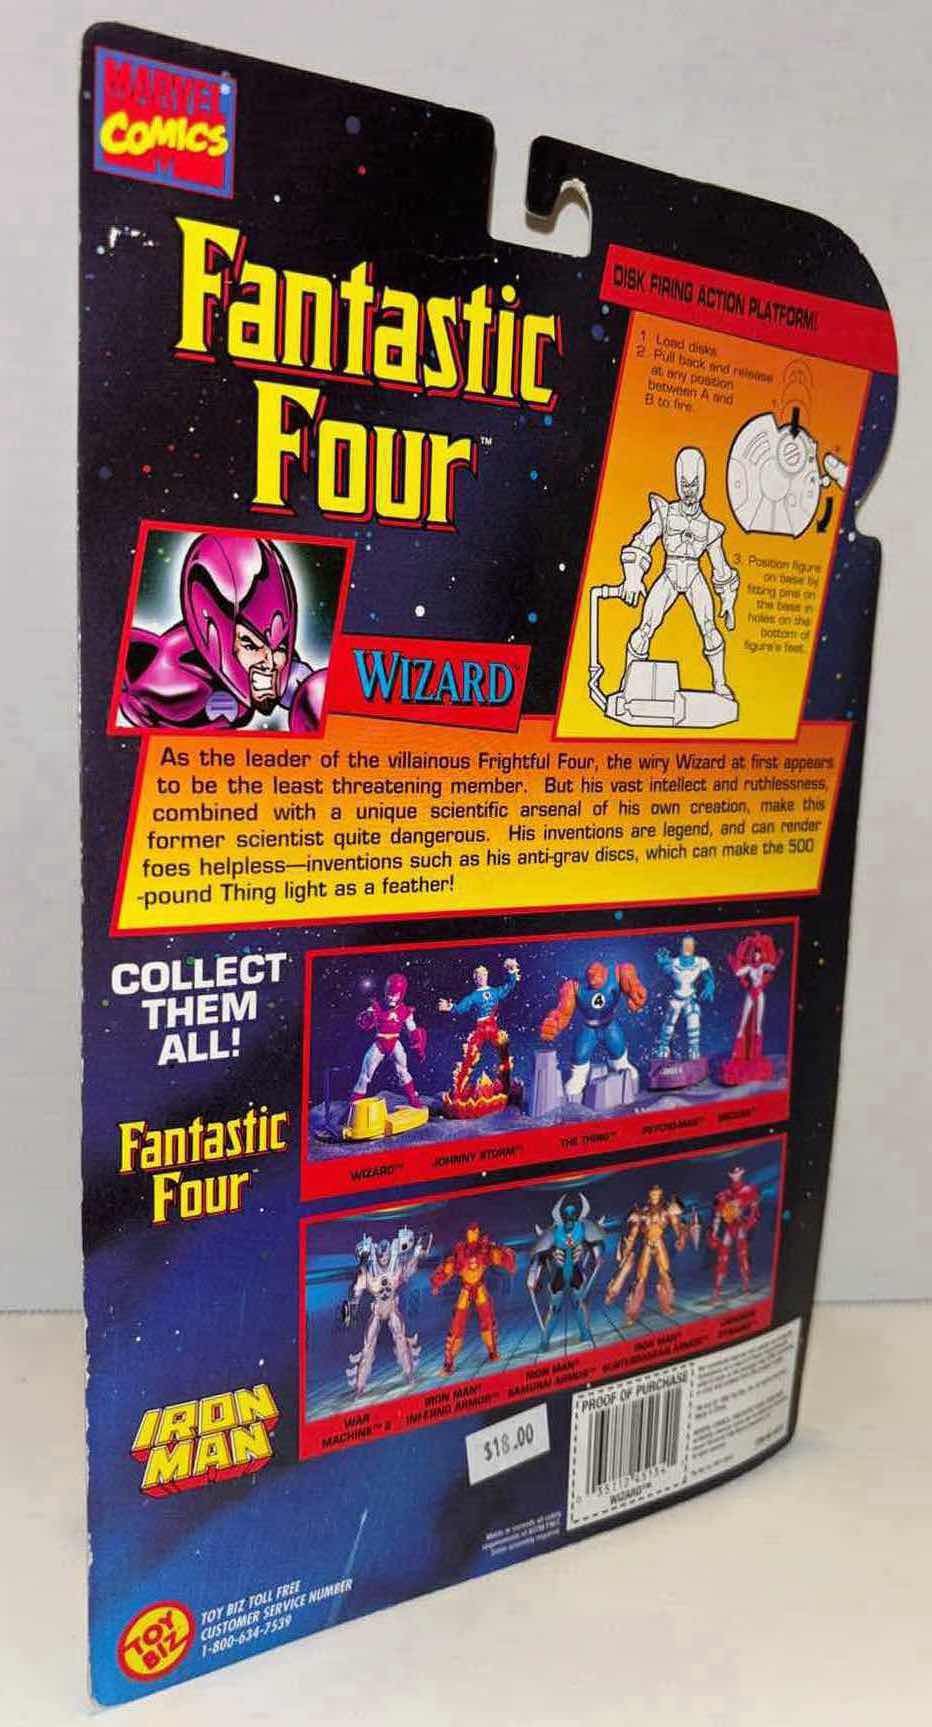 Photo 2 of NEW 1996 TOY BIZ MARVEL COMICS FANTASTIC FOUR ACTION FIGURE & ACCESSORIES, “WIZARD” W DISK FIRING ACTION PLATFORM